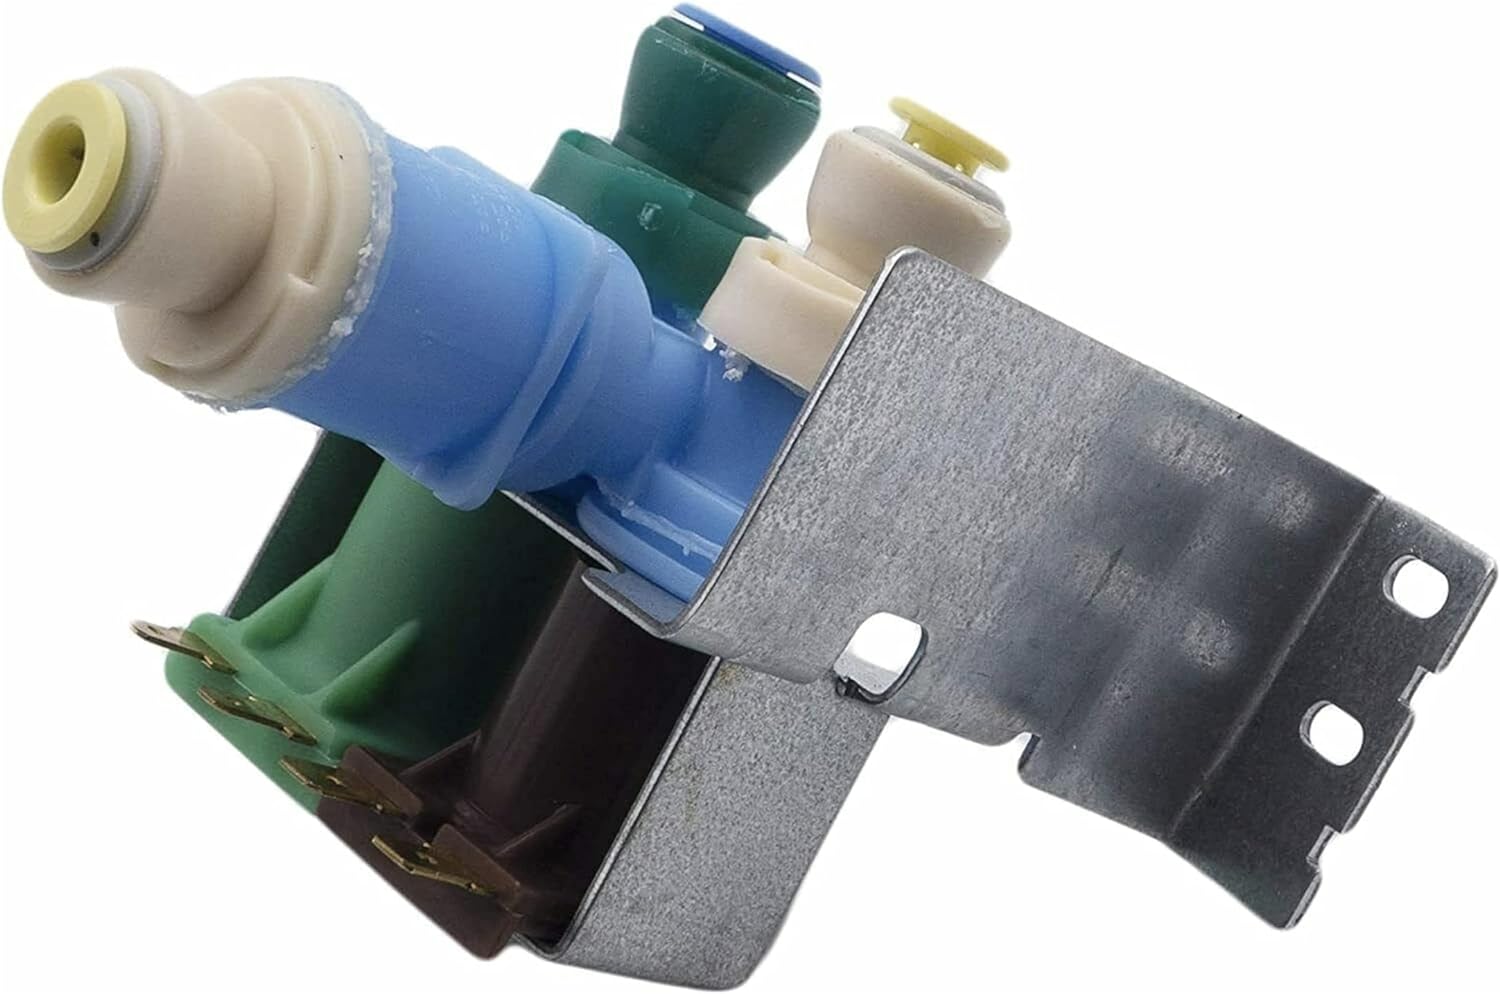 Generic Water Inlet Valve Replacement For Maytag MSD2574VEM00 MSD2574VEM10 MSD2574VEM11 MSD2574VEM12 MSD2574VEM13 MSD2574VEQ00 MSD2574V